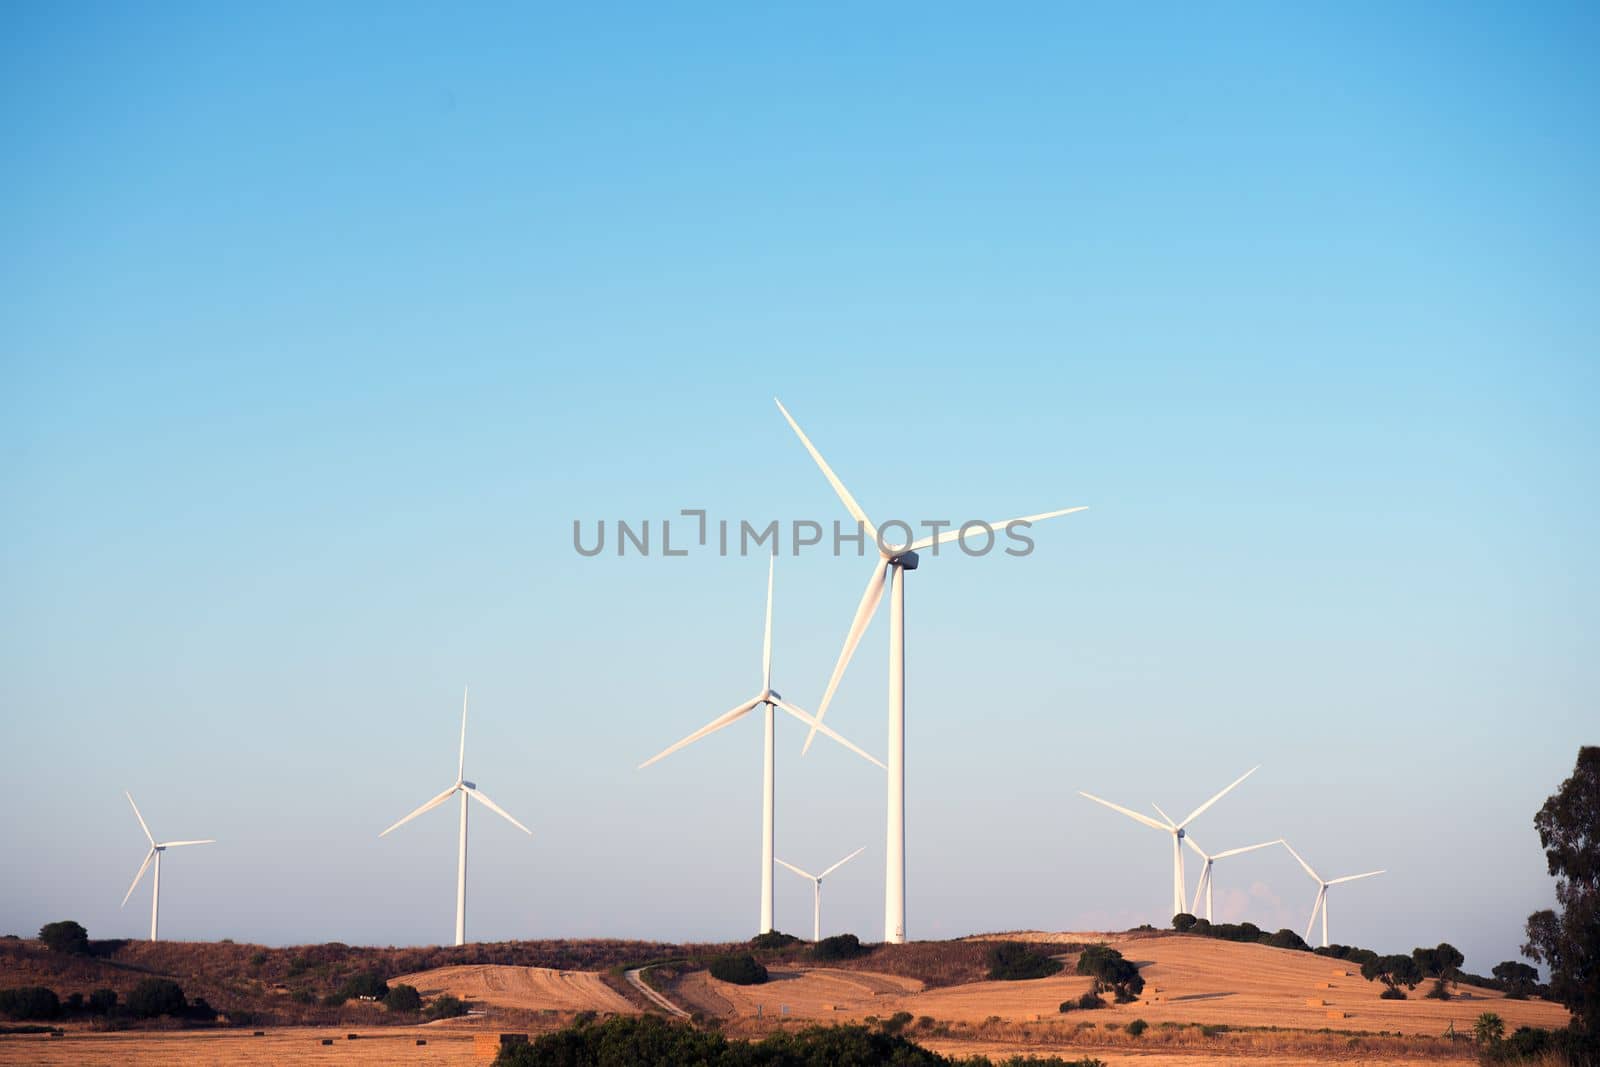 set of windmills produce clean energy in a wind farm. They are in a rural environment surrounded by crops and trees, the sky is clean and clear. Copy space